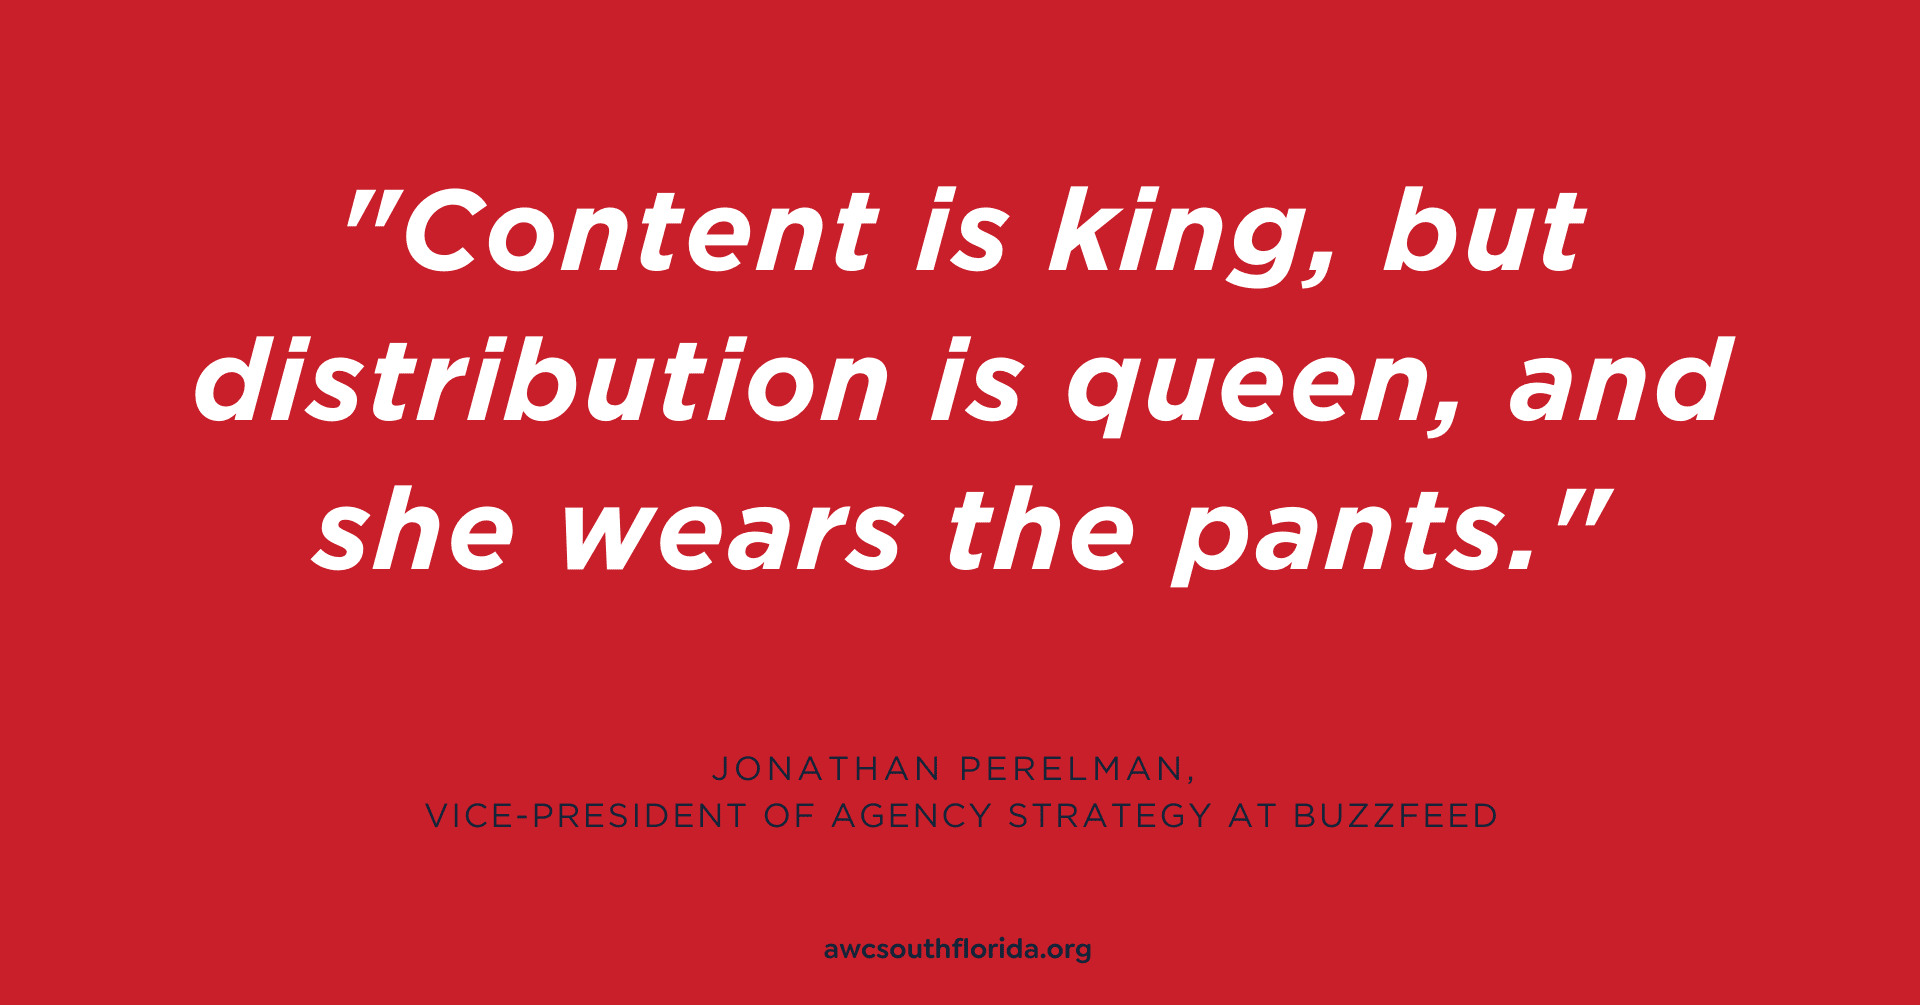 Quote: "Content is king, but distribution is queen, and she wears the pants." -- via Jonathan Perelman, vice-president of agency strategy at Buzzfeed